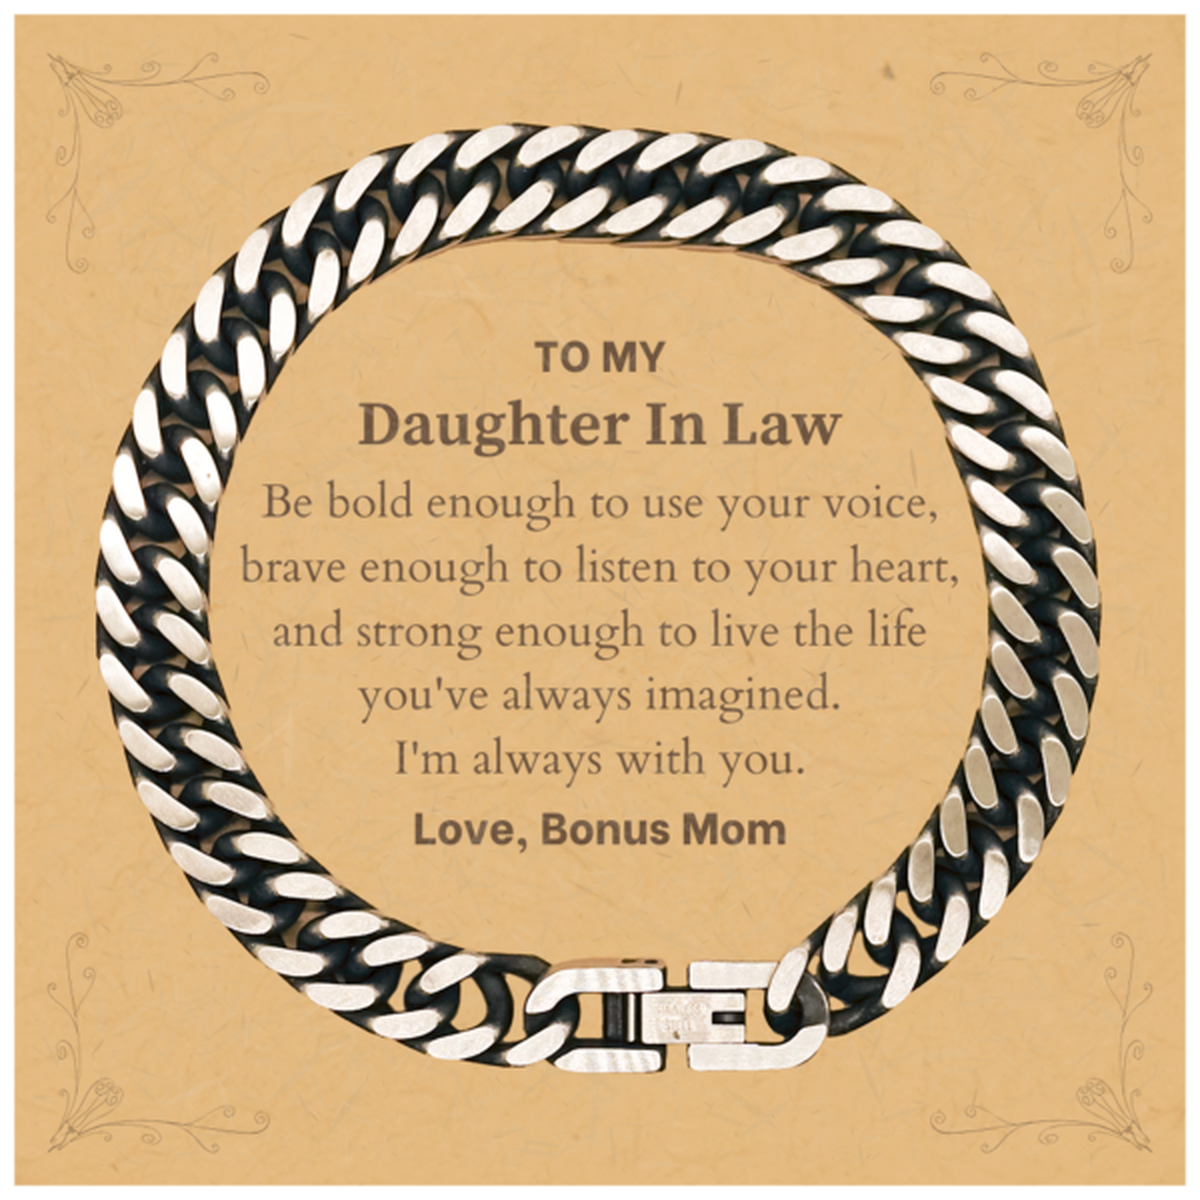 Keepsake Daughter In Law Cuban Link Chain Bracelet Gift Idea Graduation Christmas Birthday Daughter In Law from Bonus Mom, Daughter In Law Be bold enough to use your voice, brave enough to listen to your heart. Love, Bonus Mom